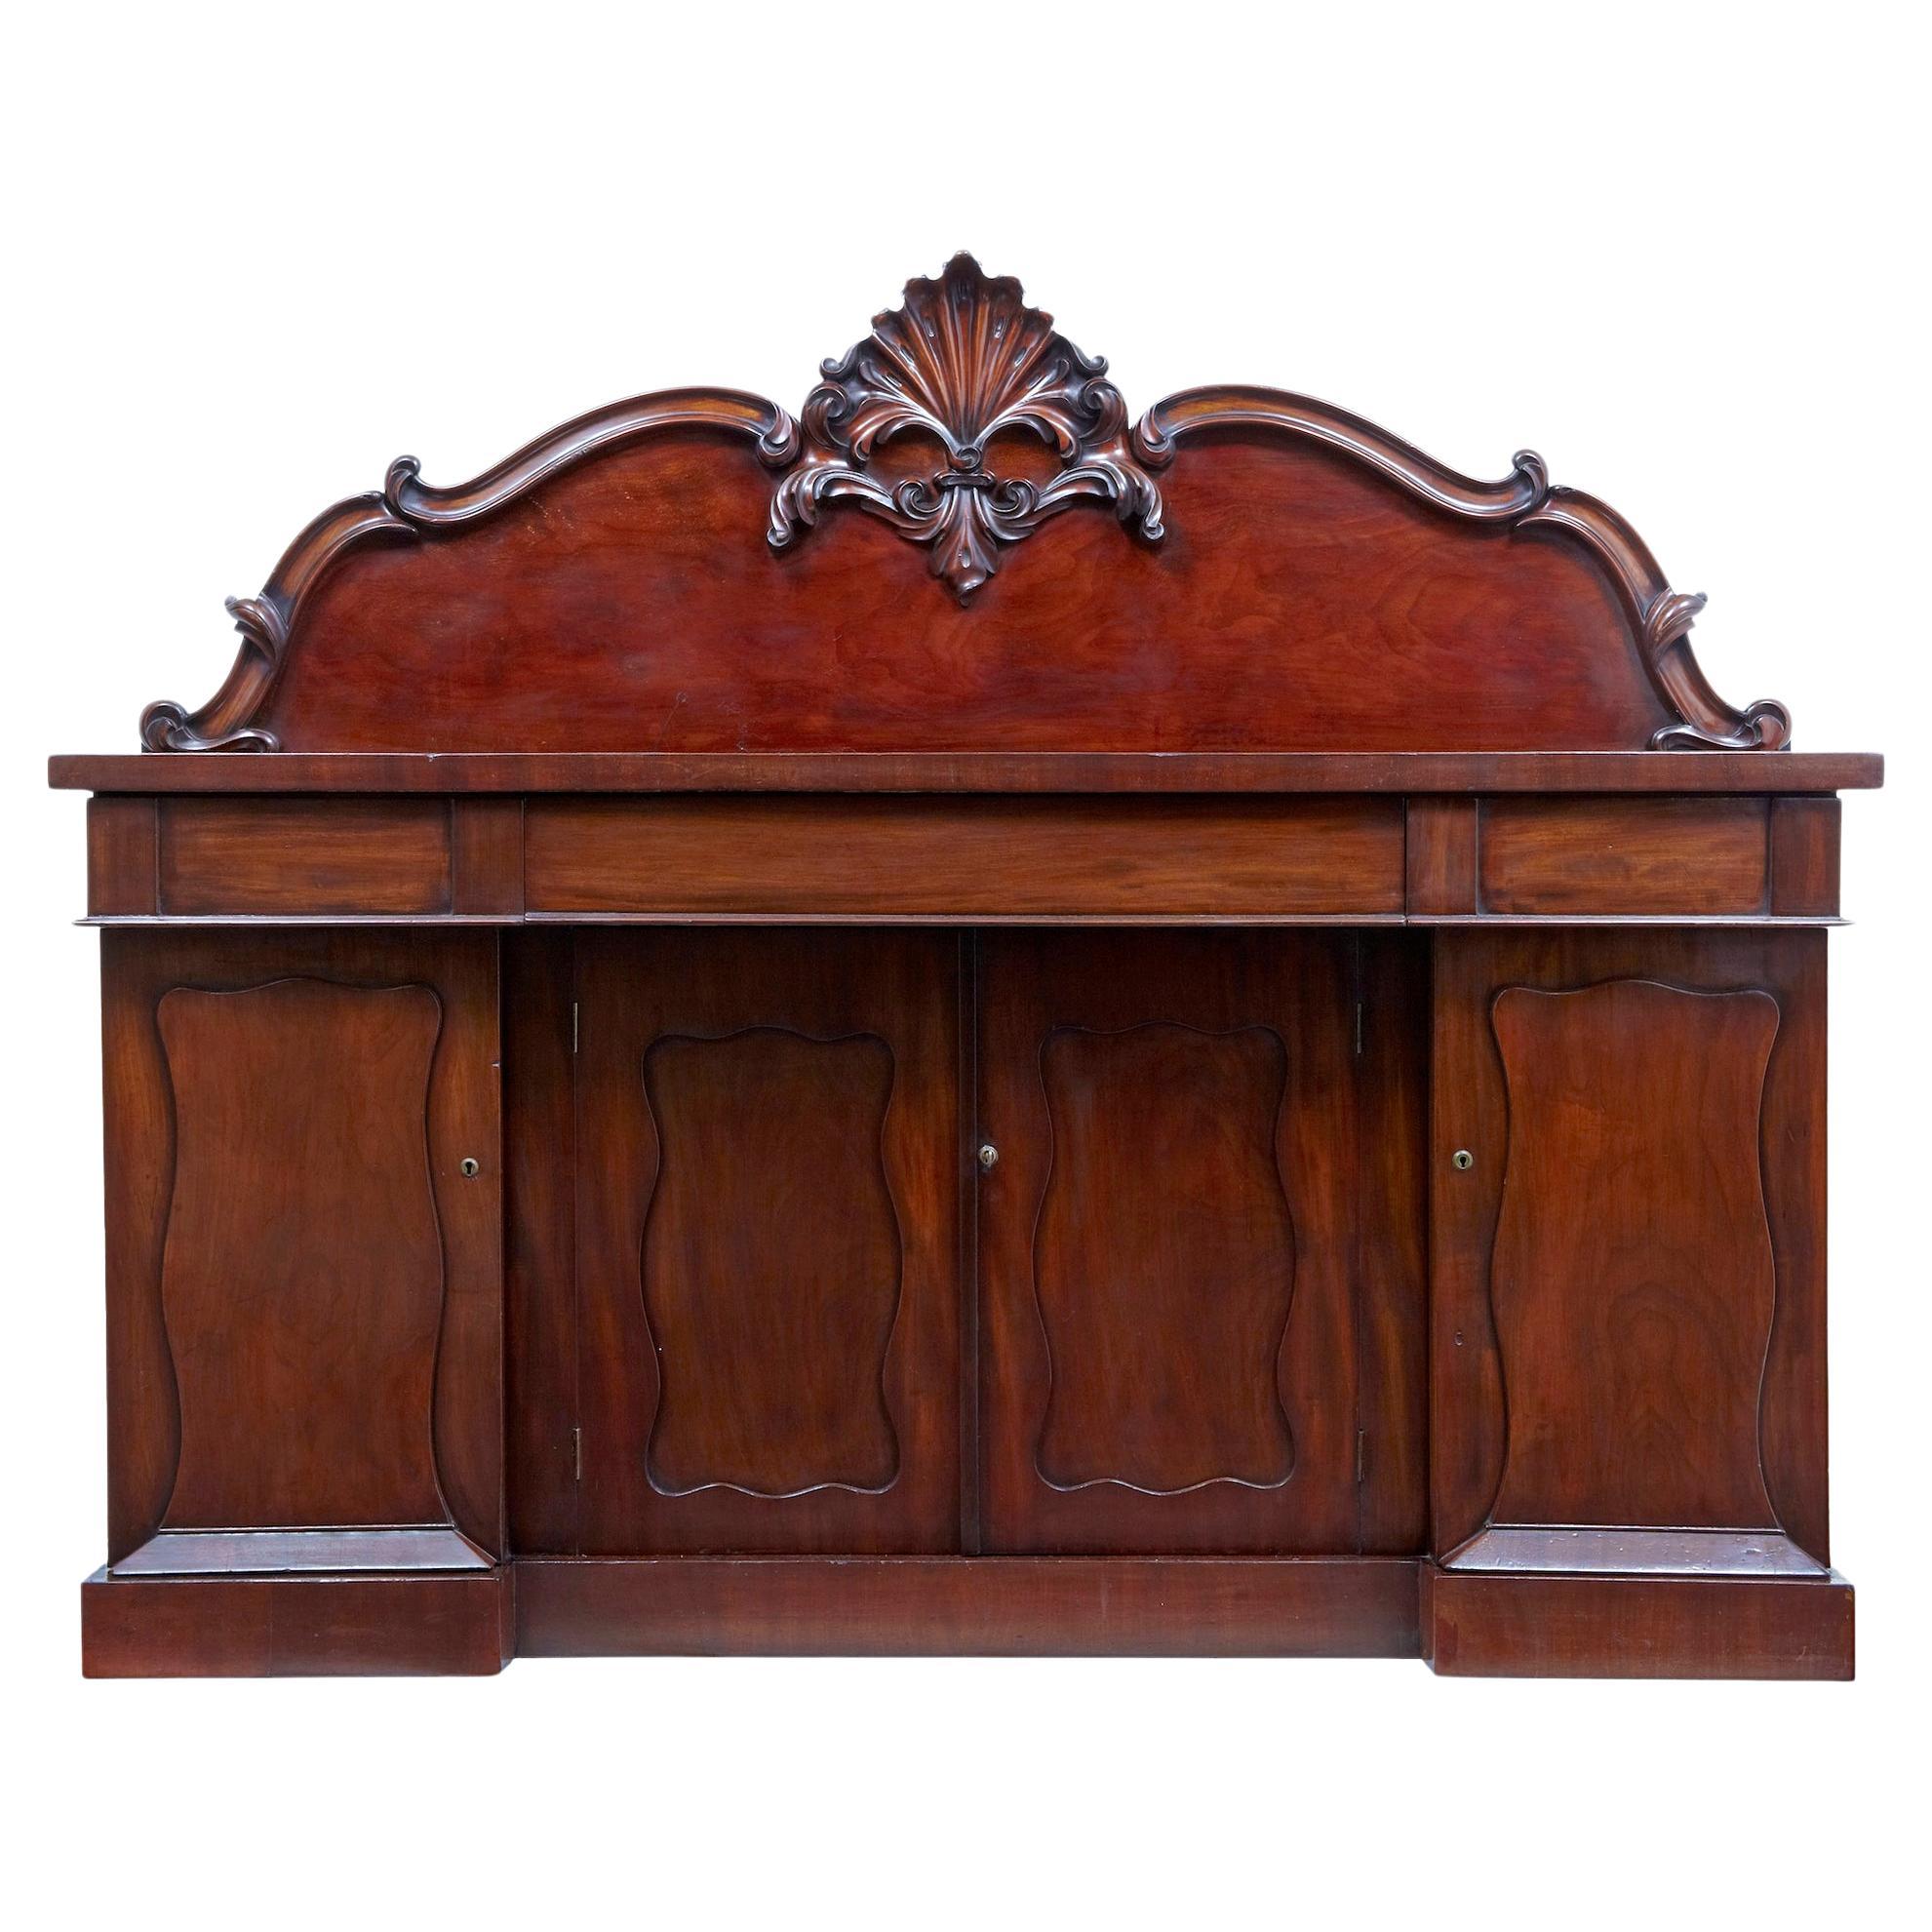 19th century William IV carved mahogany sideboard For Sale